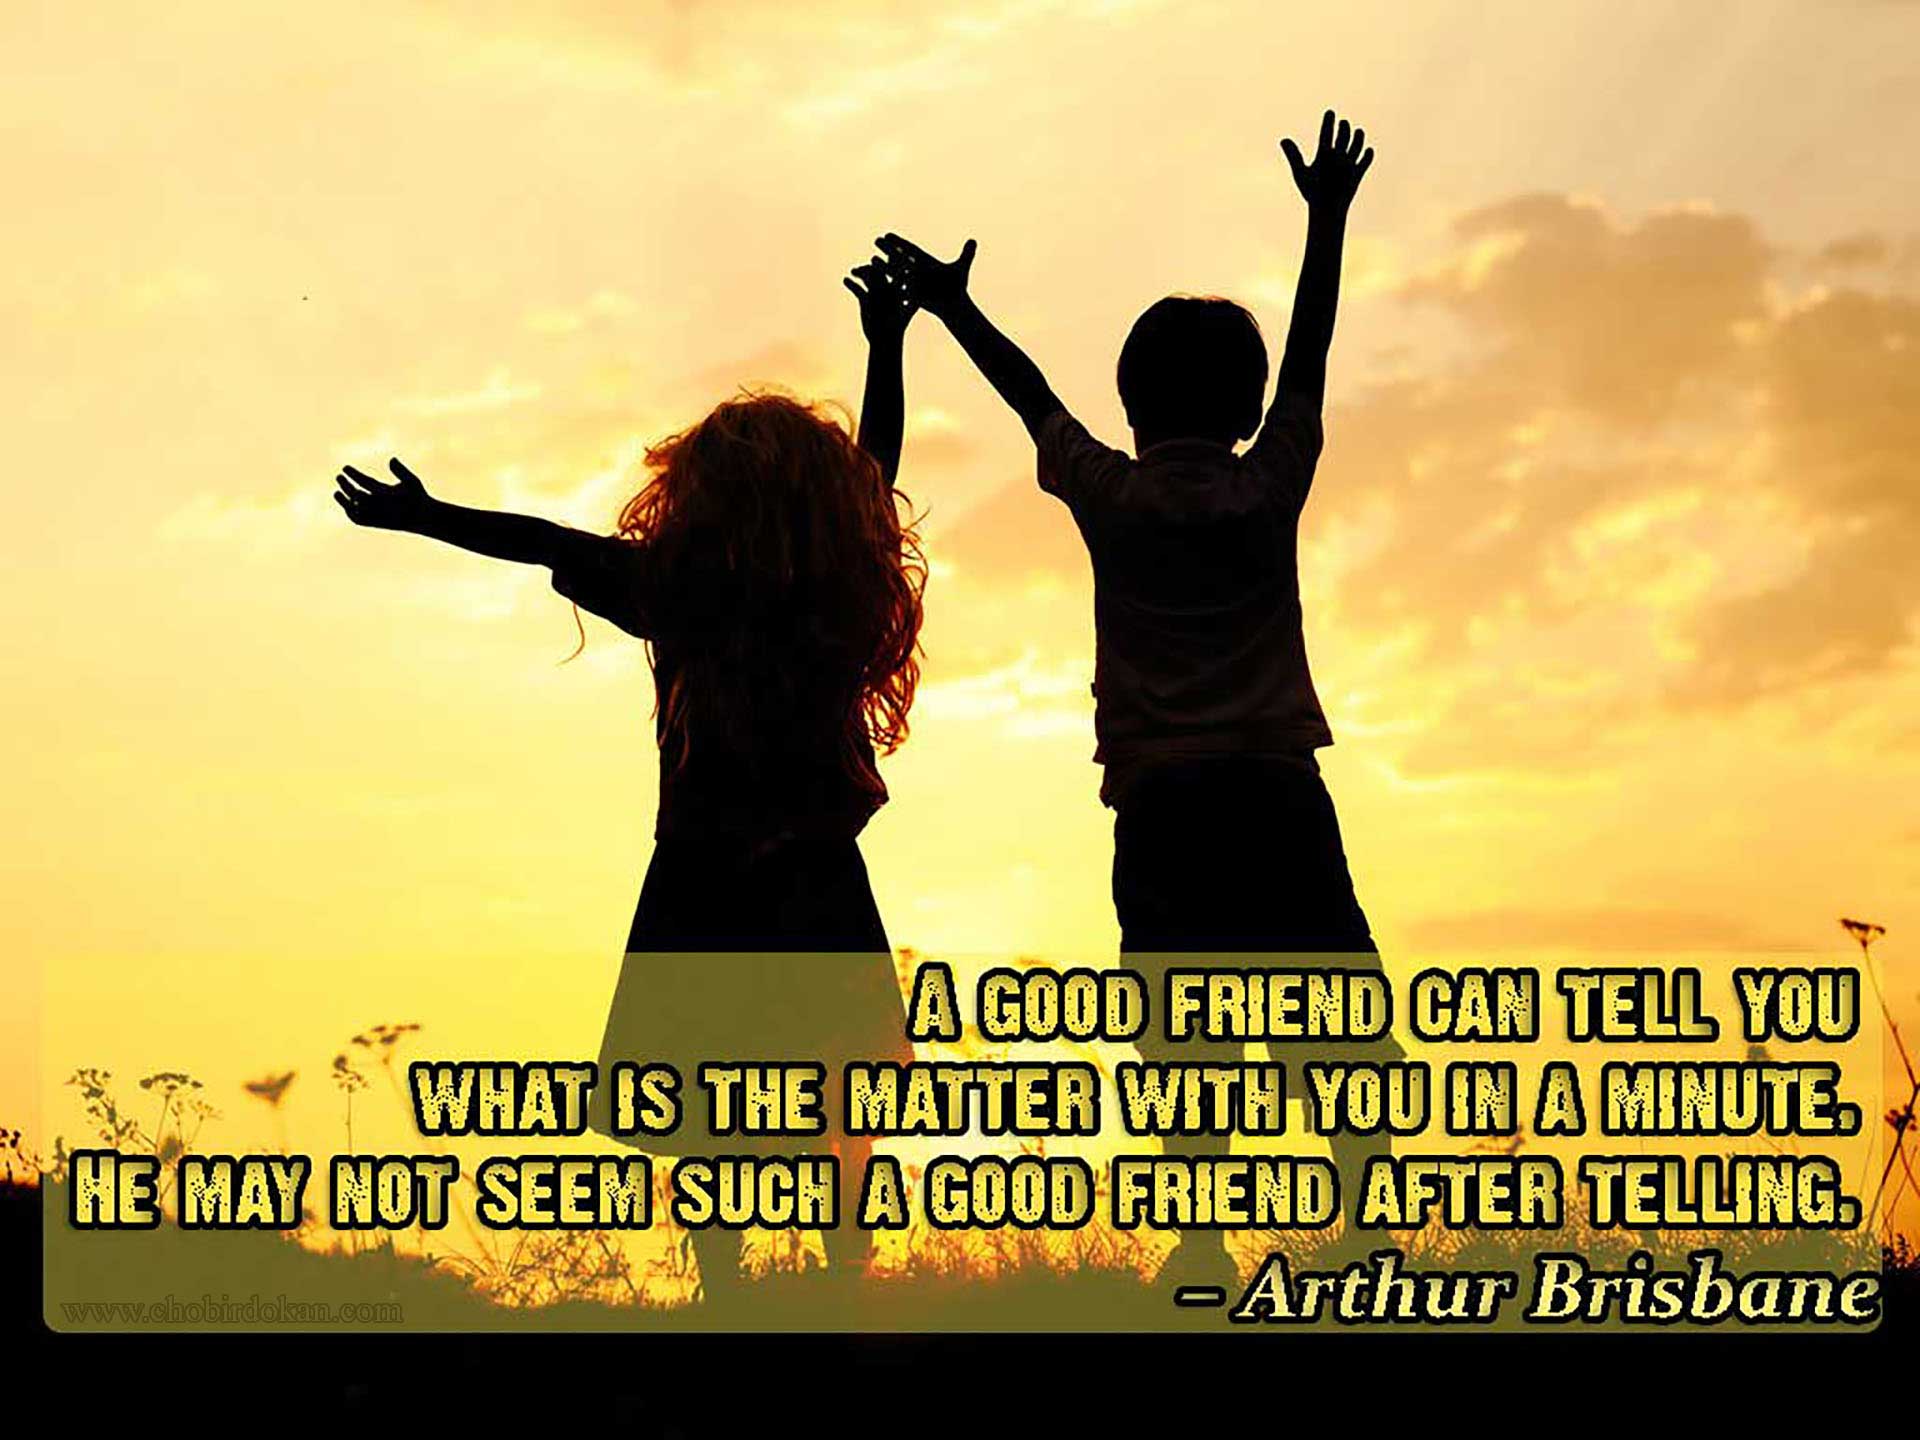 Friendship Quote Image - Good Photos Of Friendship - 1920x1440 Wallpaper -  